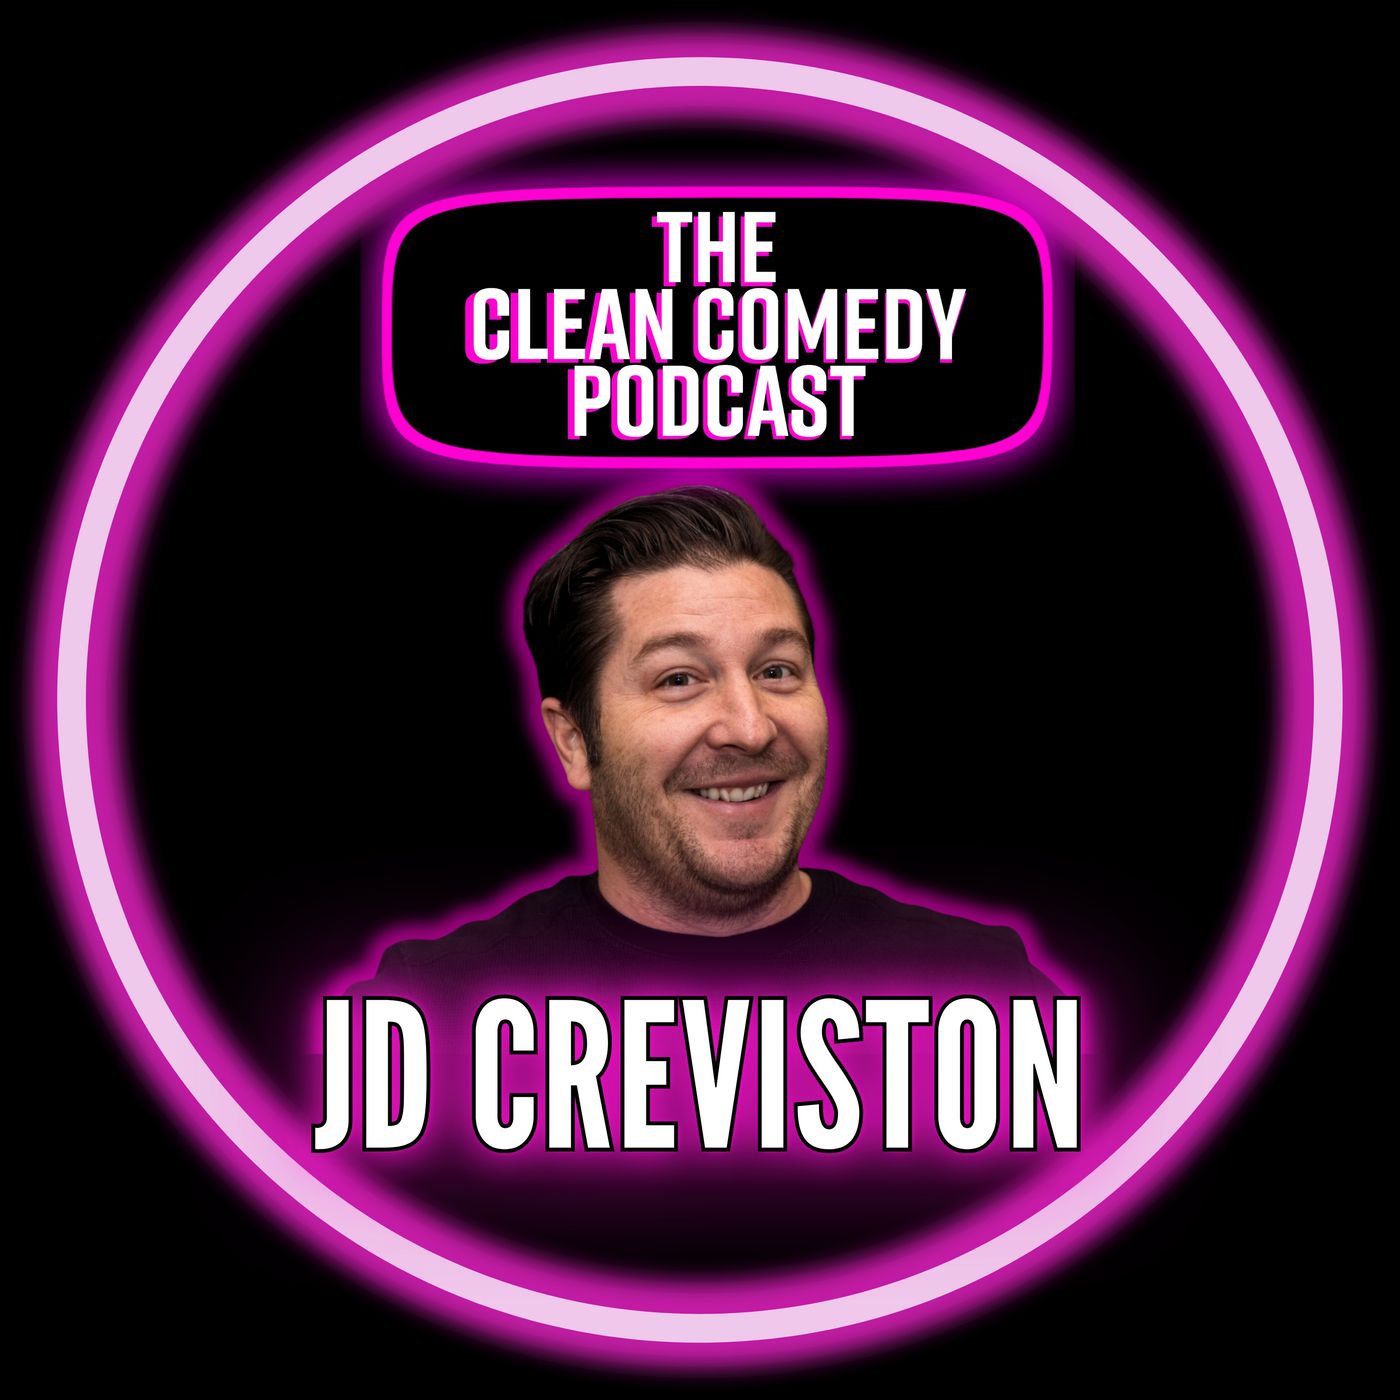 The Clean Comedy Podcast w/JD Creviston podcast show image